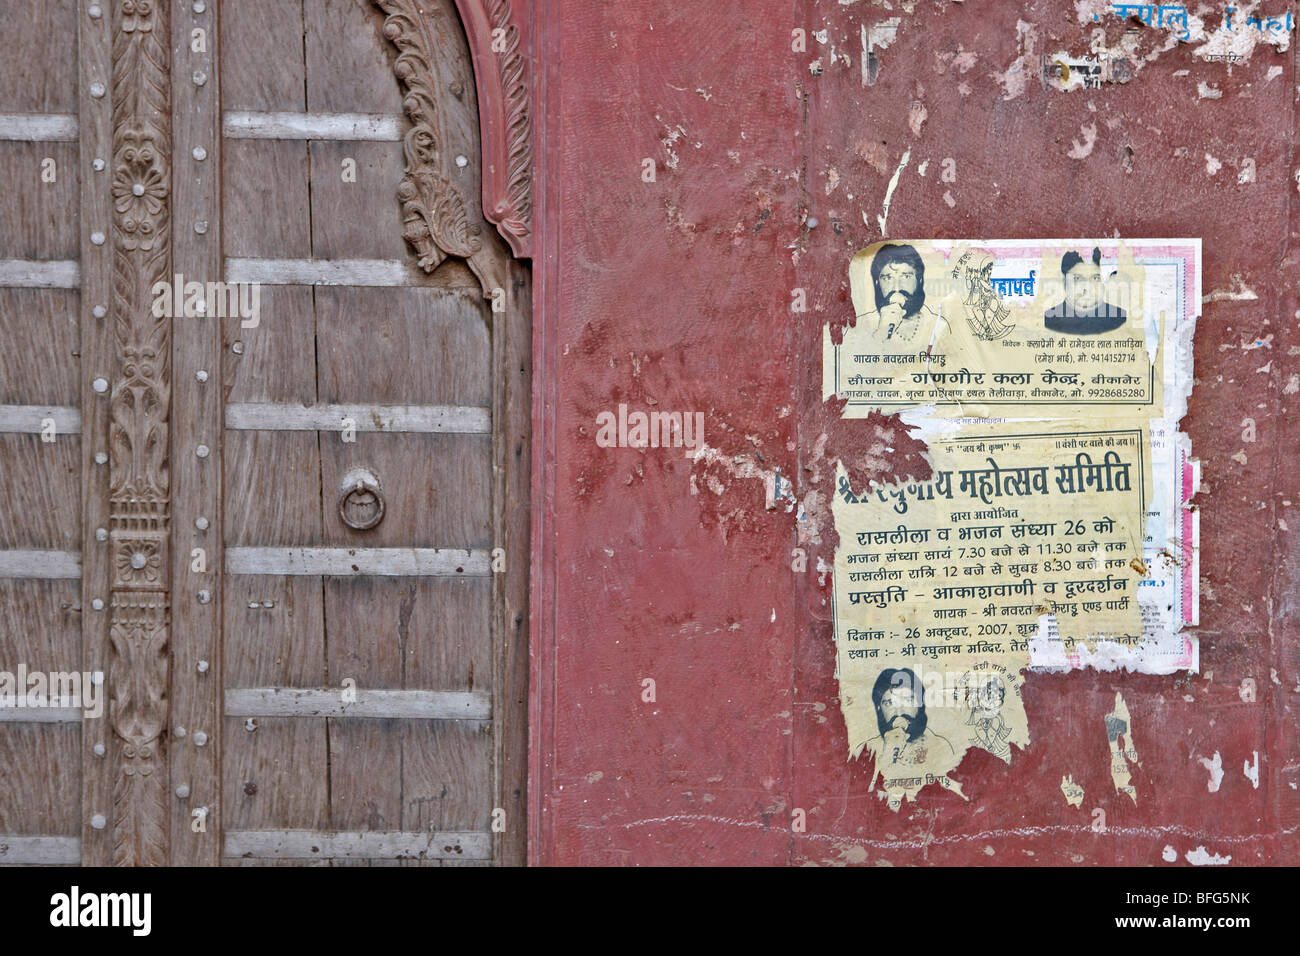 Lacerated Poster on a Wall in Bikaner Rajasthan India Stock Photo